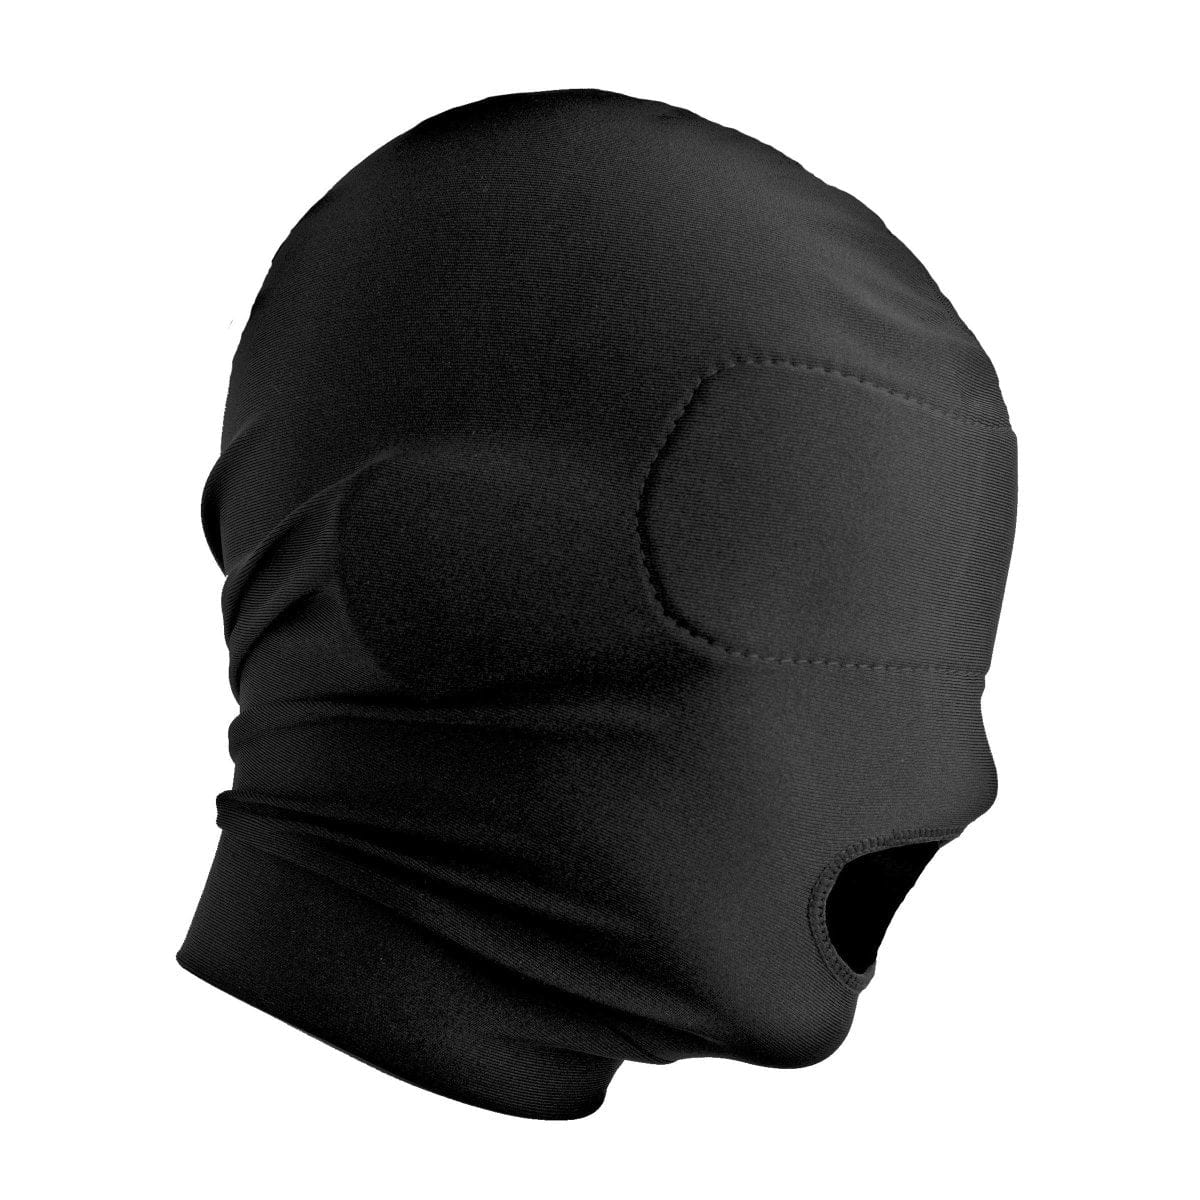 Master Series Hood Disguise Open Mouth Hood With Padded Blindfold at the Haus of Shag